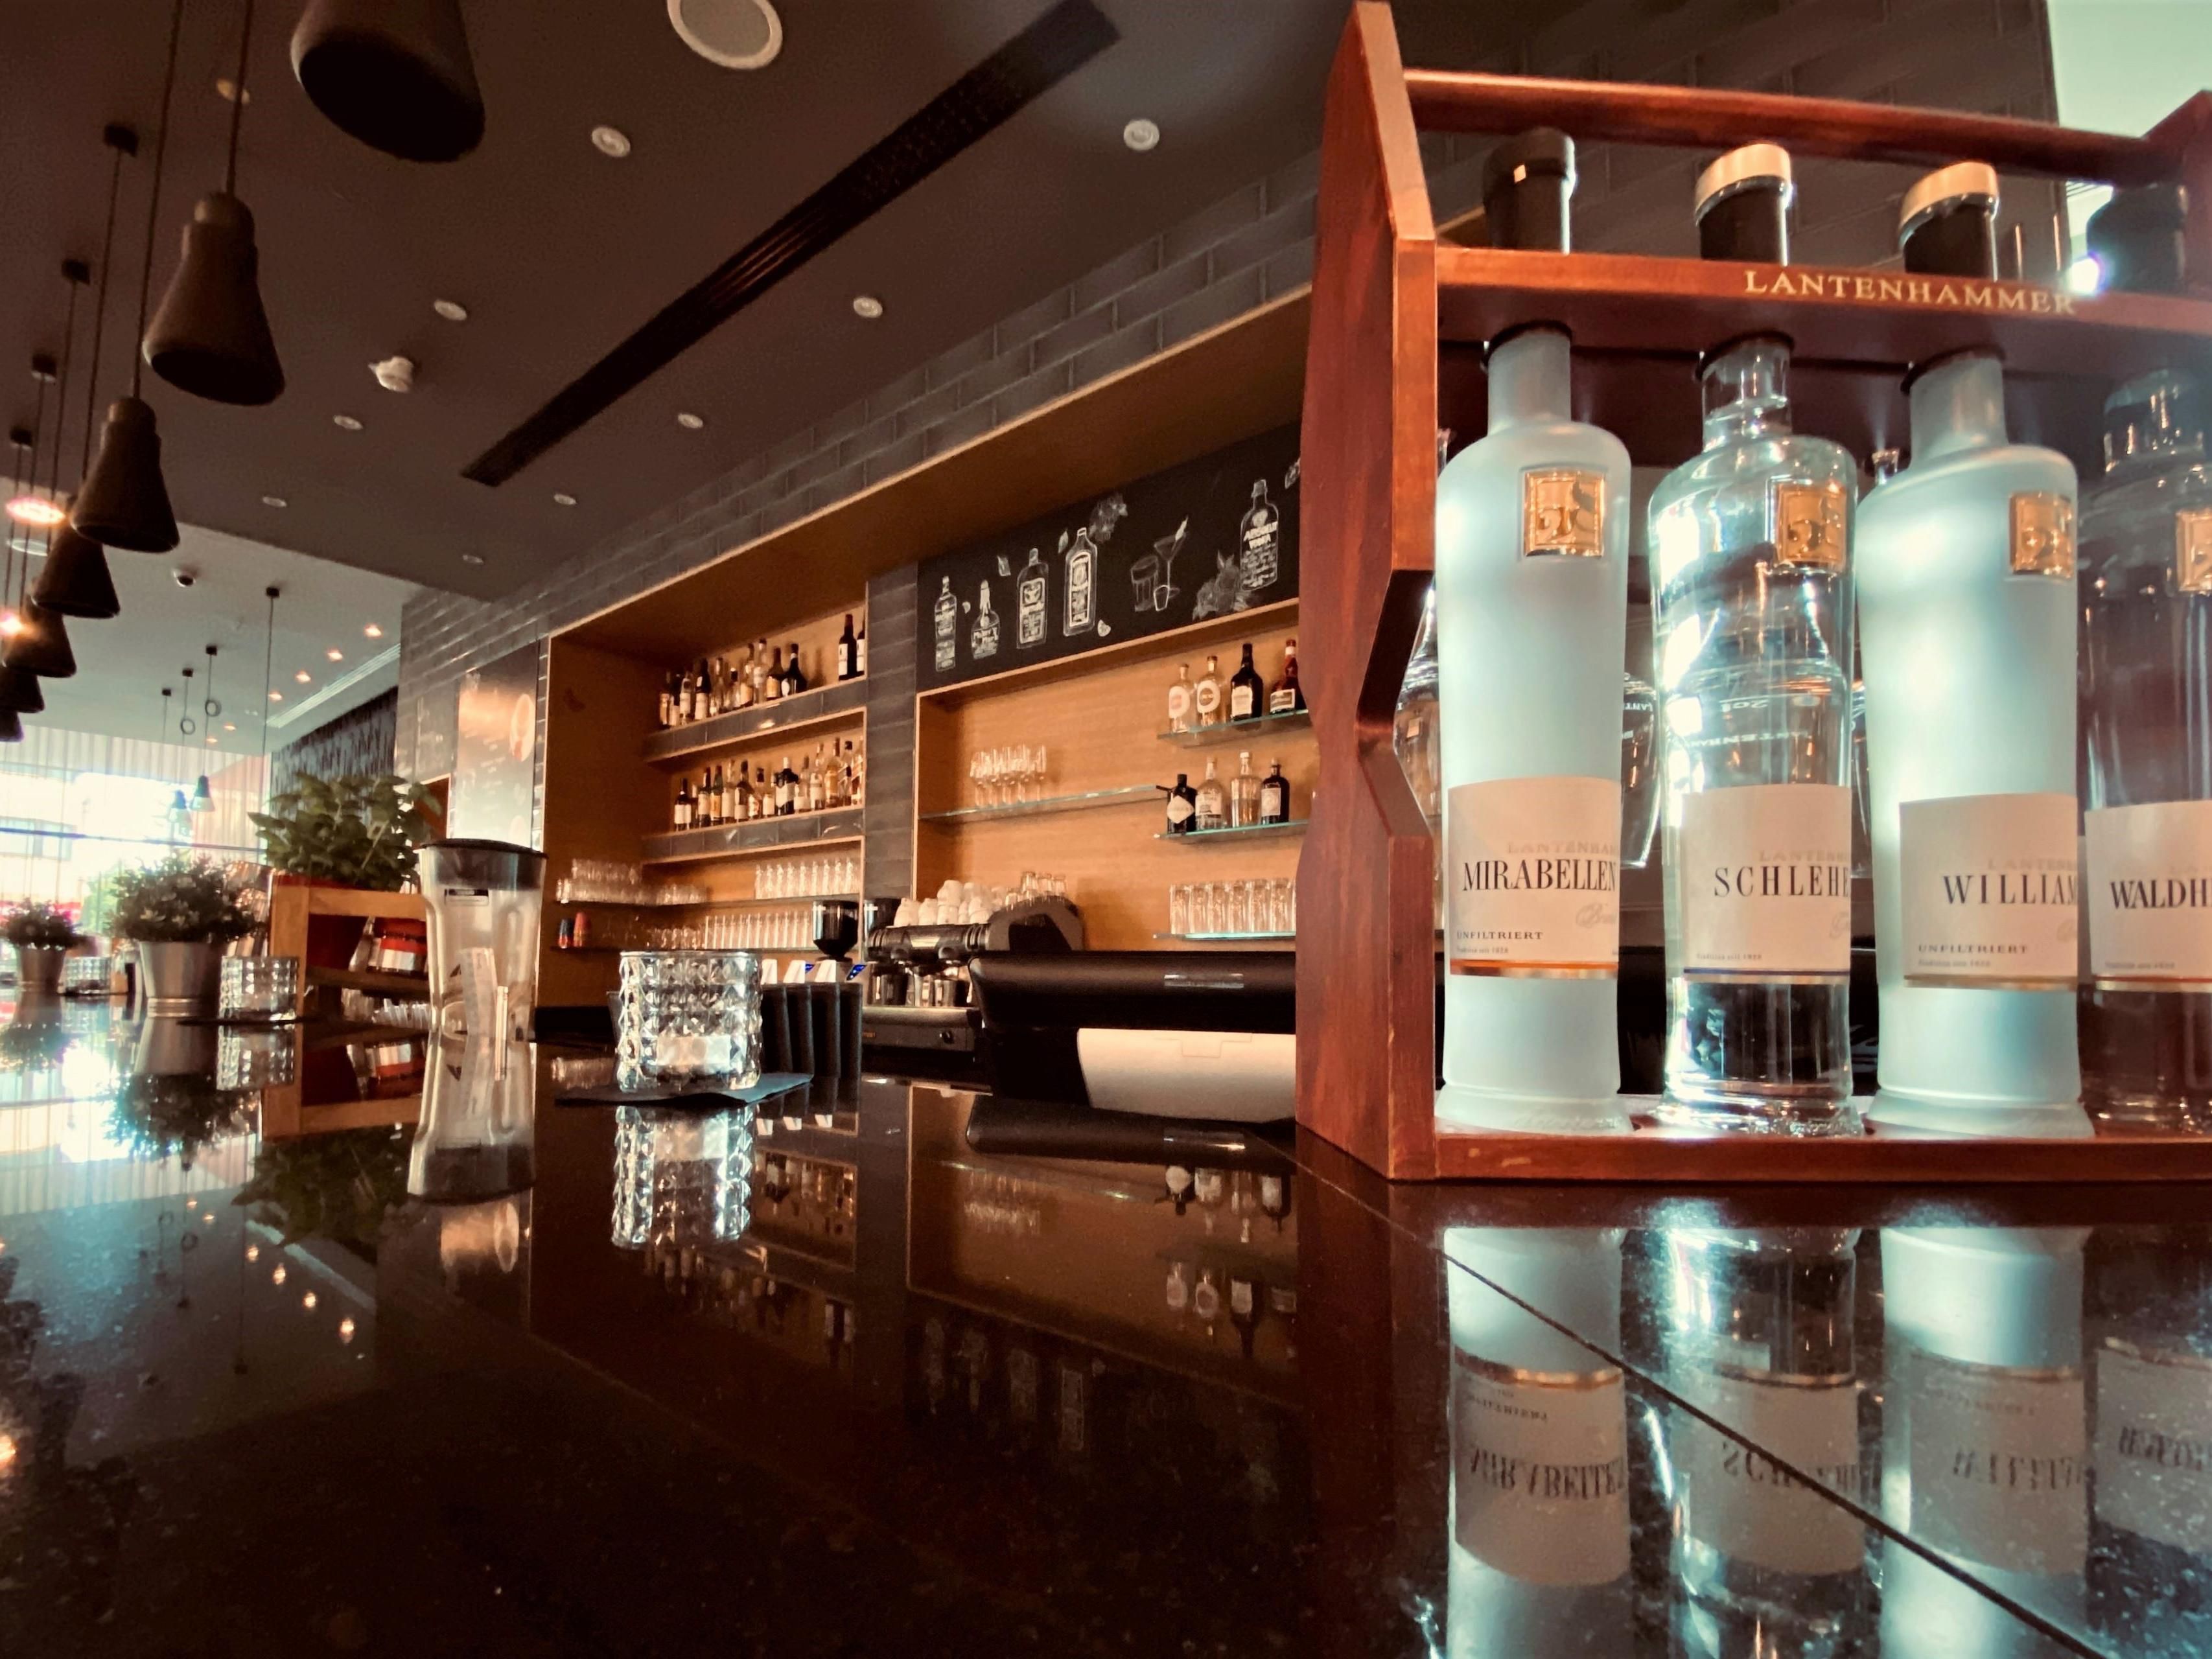 Visit us in our open lobby bar for our cocktail happy hour. Enjoy delicious drinks created by our team for only €6.00 per cocktail every day from 6pm to 7pm. Please note the applicable Covid-19 rules.